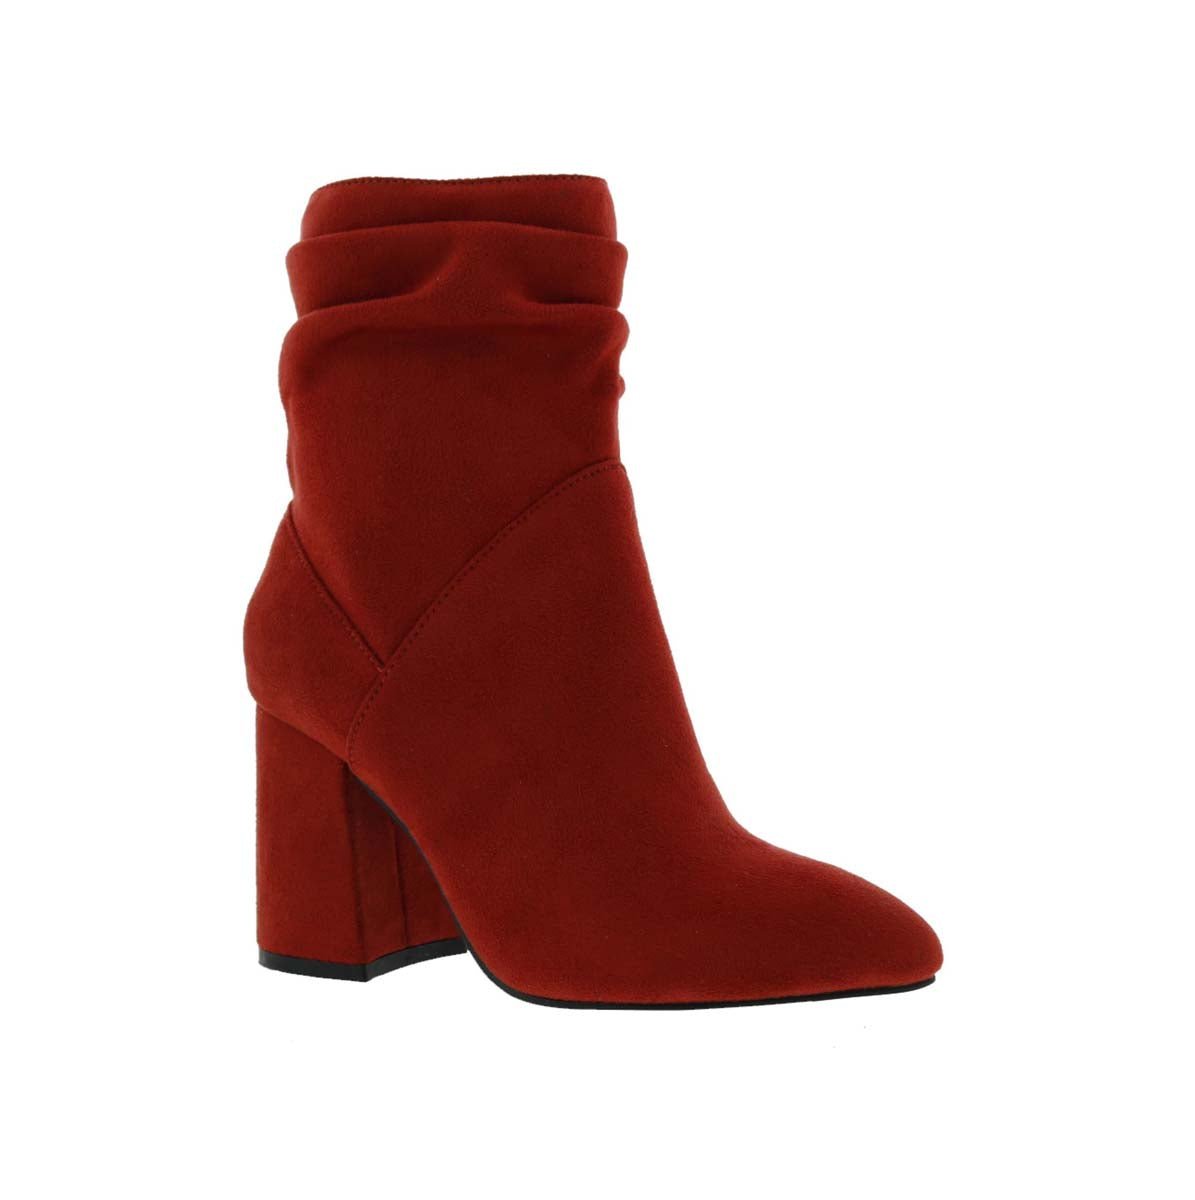 BELLINI CARSON WOMEN BOOTS IN RED MICROSUEDE - TLW Shoes